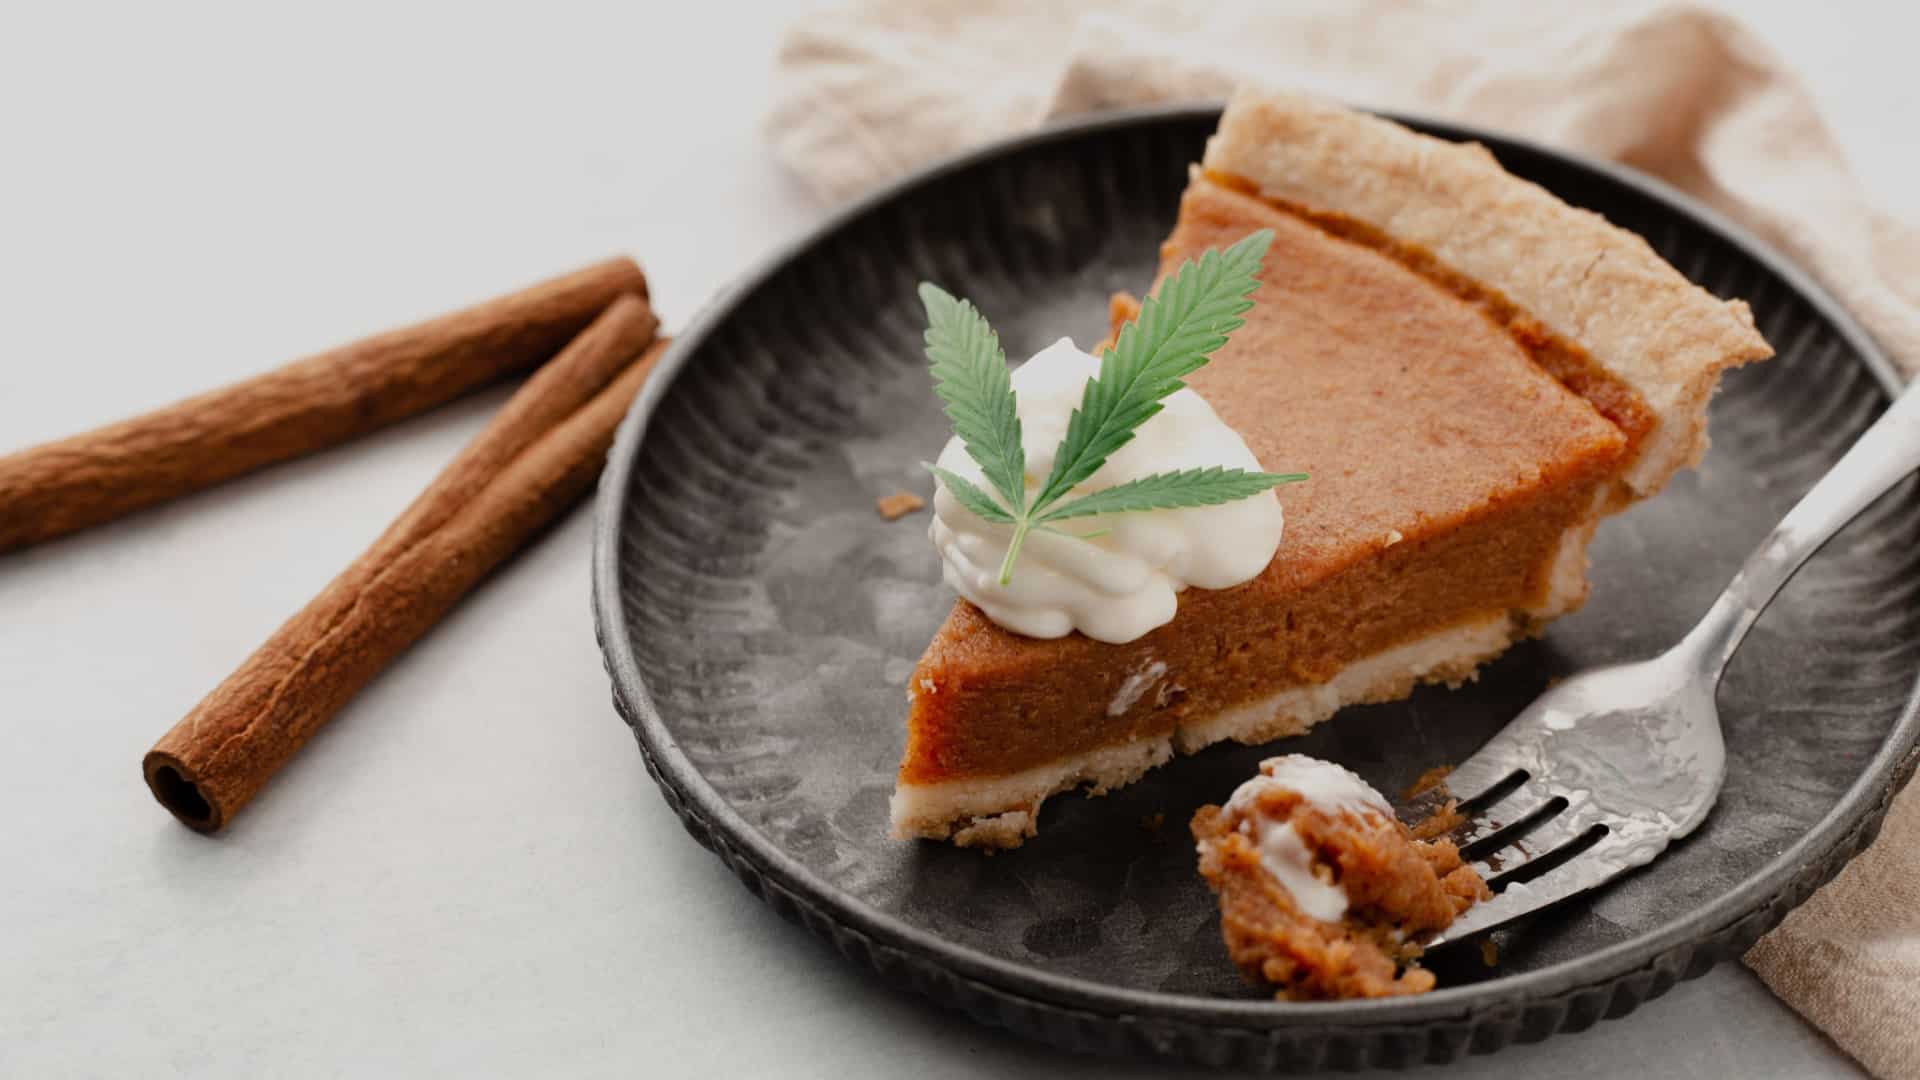 Cannabinthusiast | Give Holiday Thanks with These Gadgets